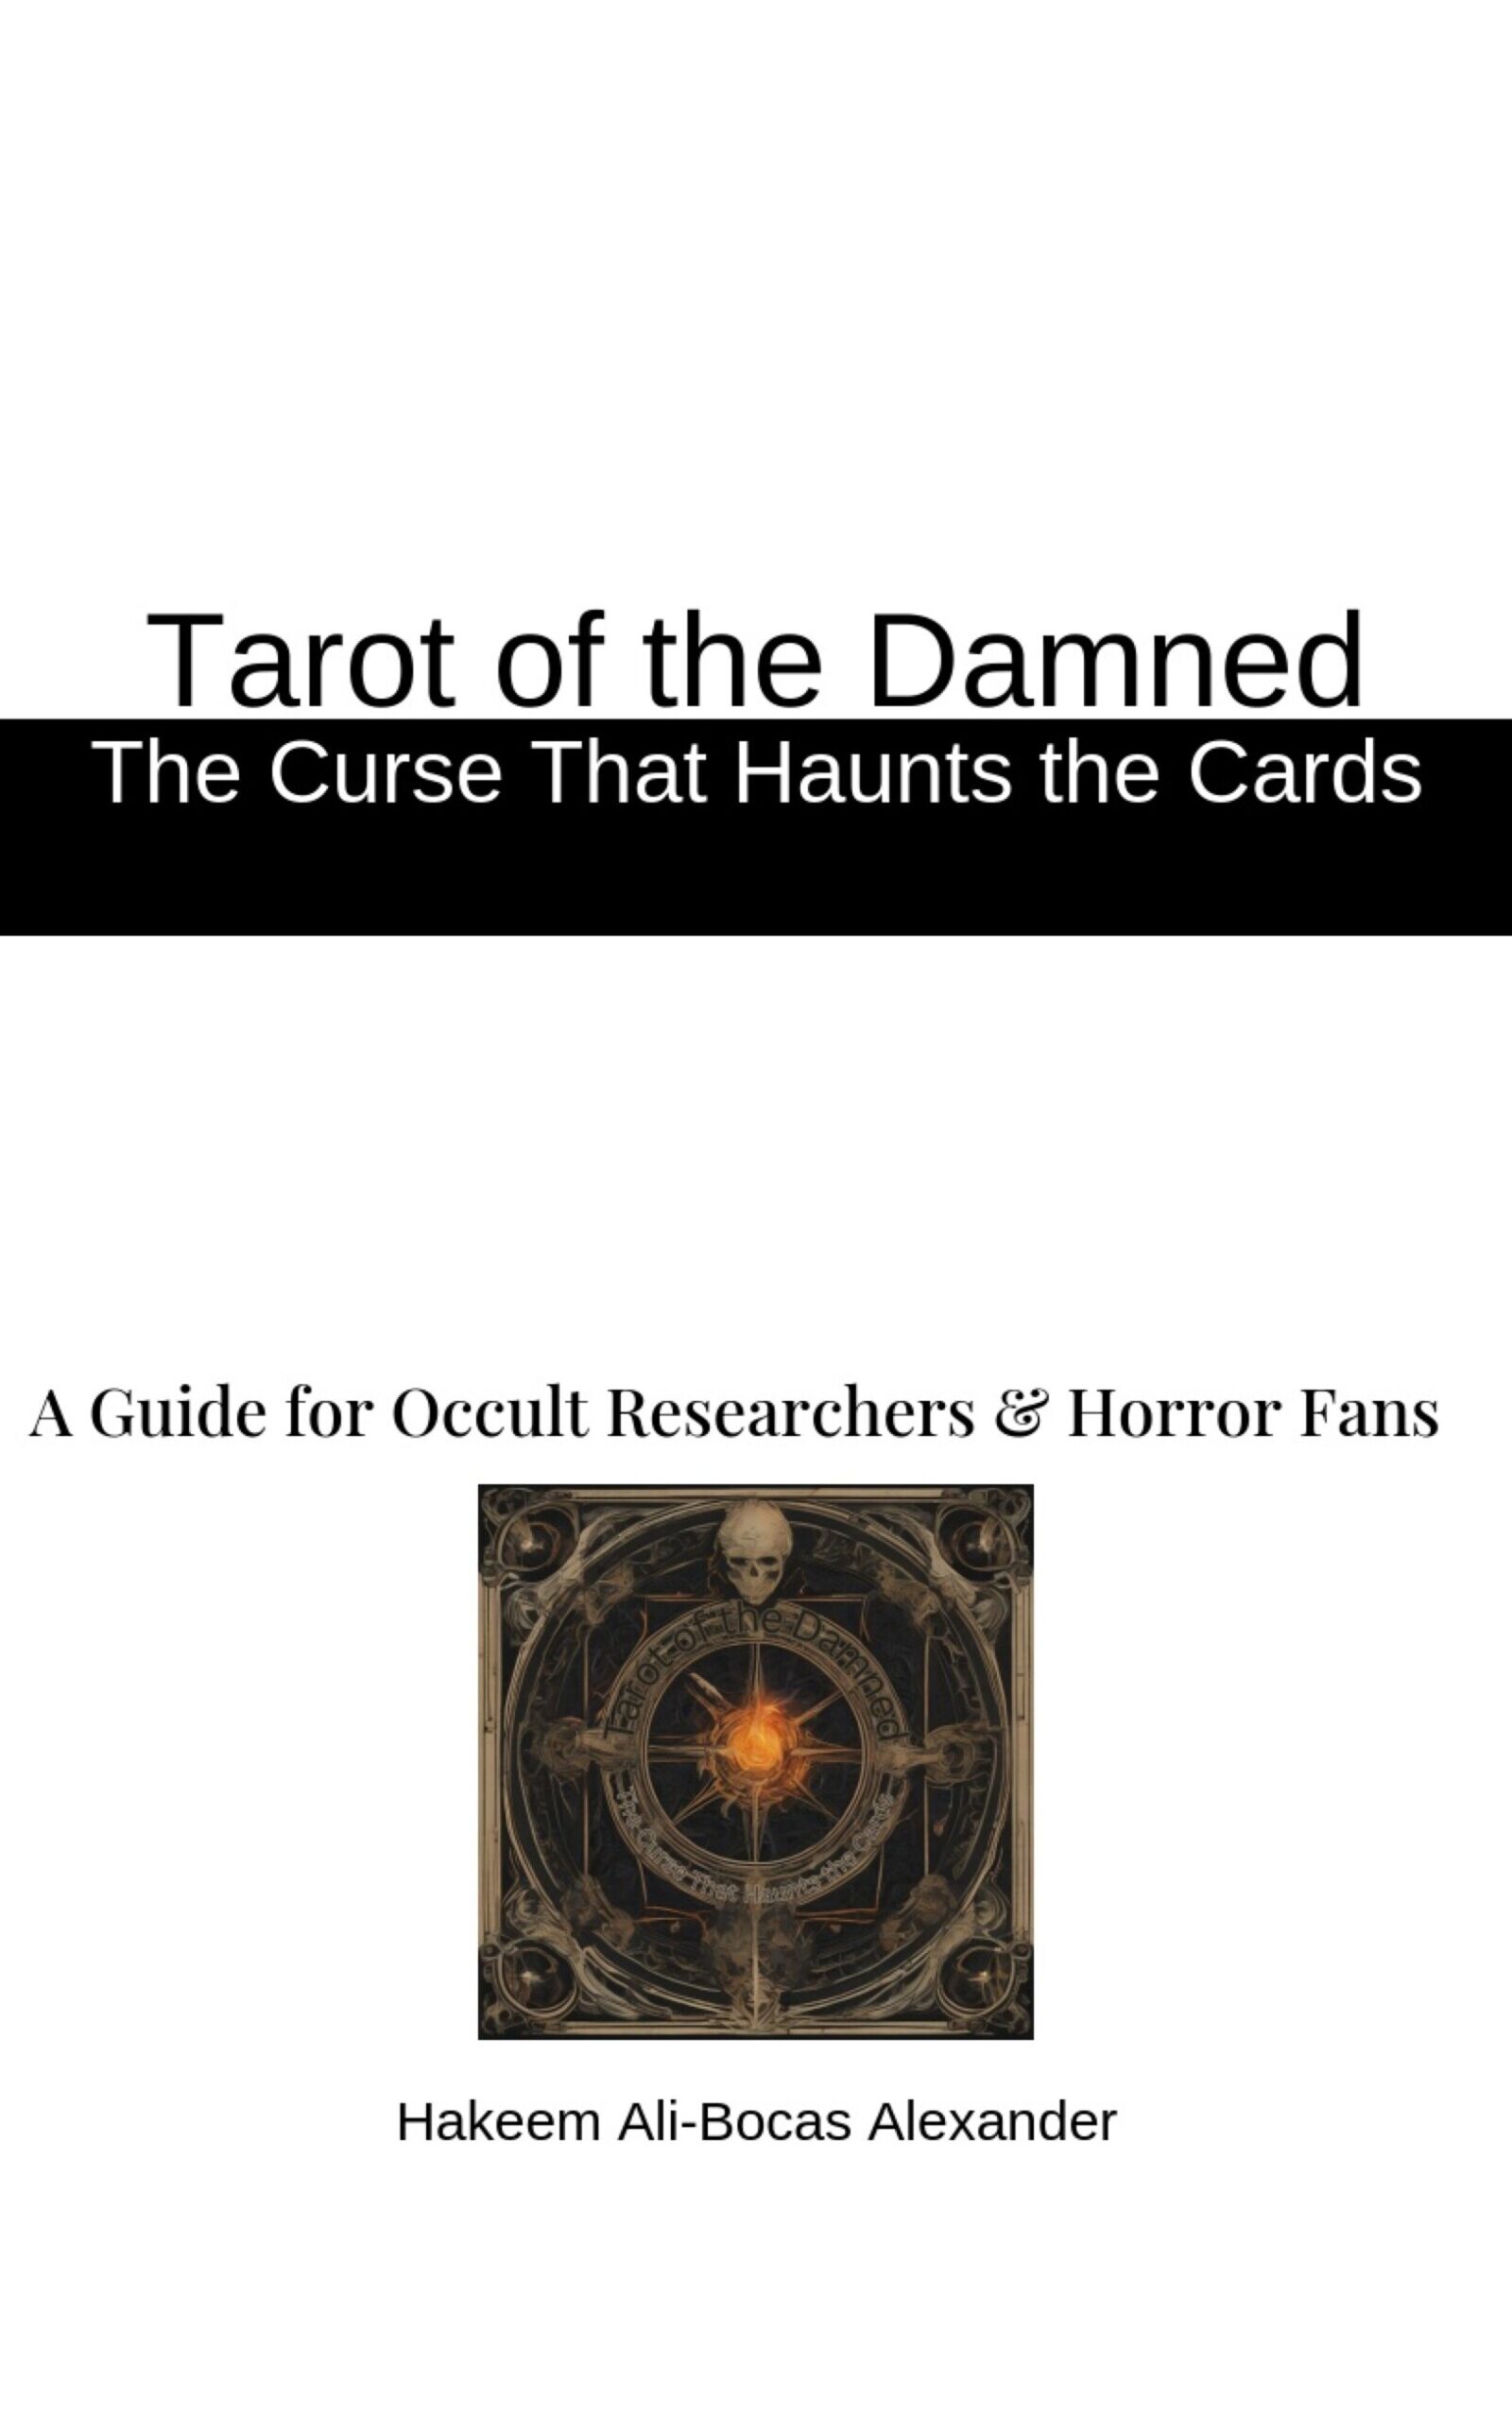 Tarot Movie UnOfficial Companion Book – The Cursed Tarot: Haunted Cards and Their Dark Secrets